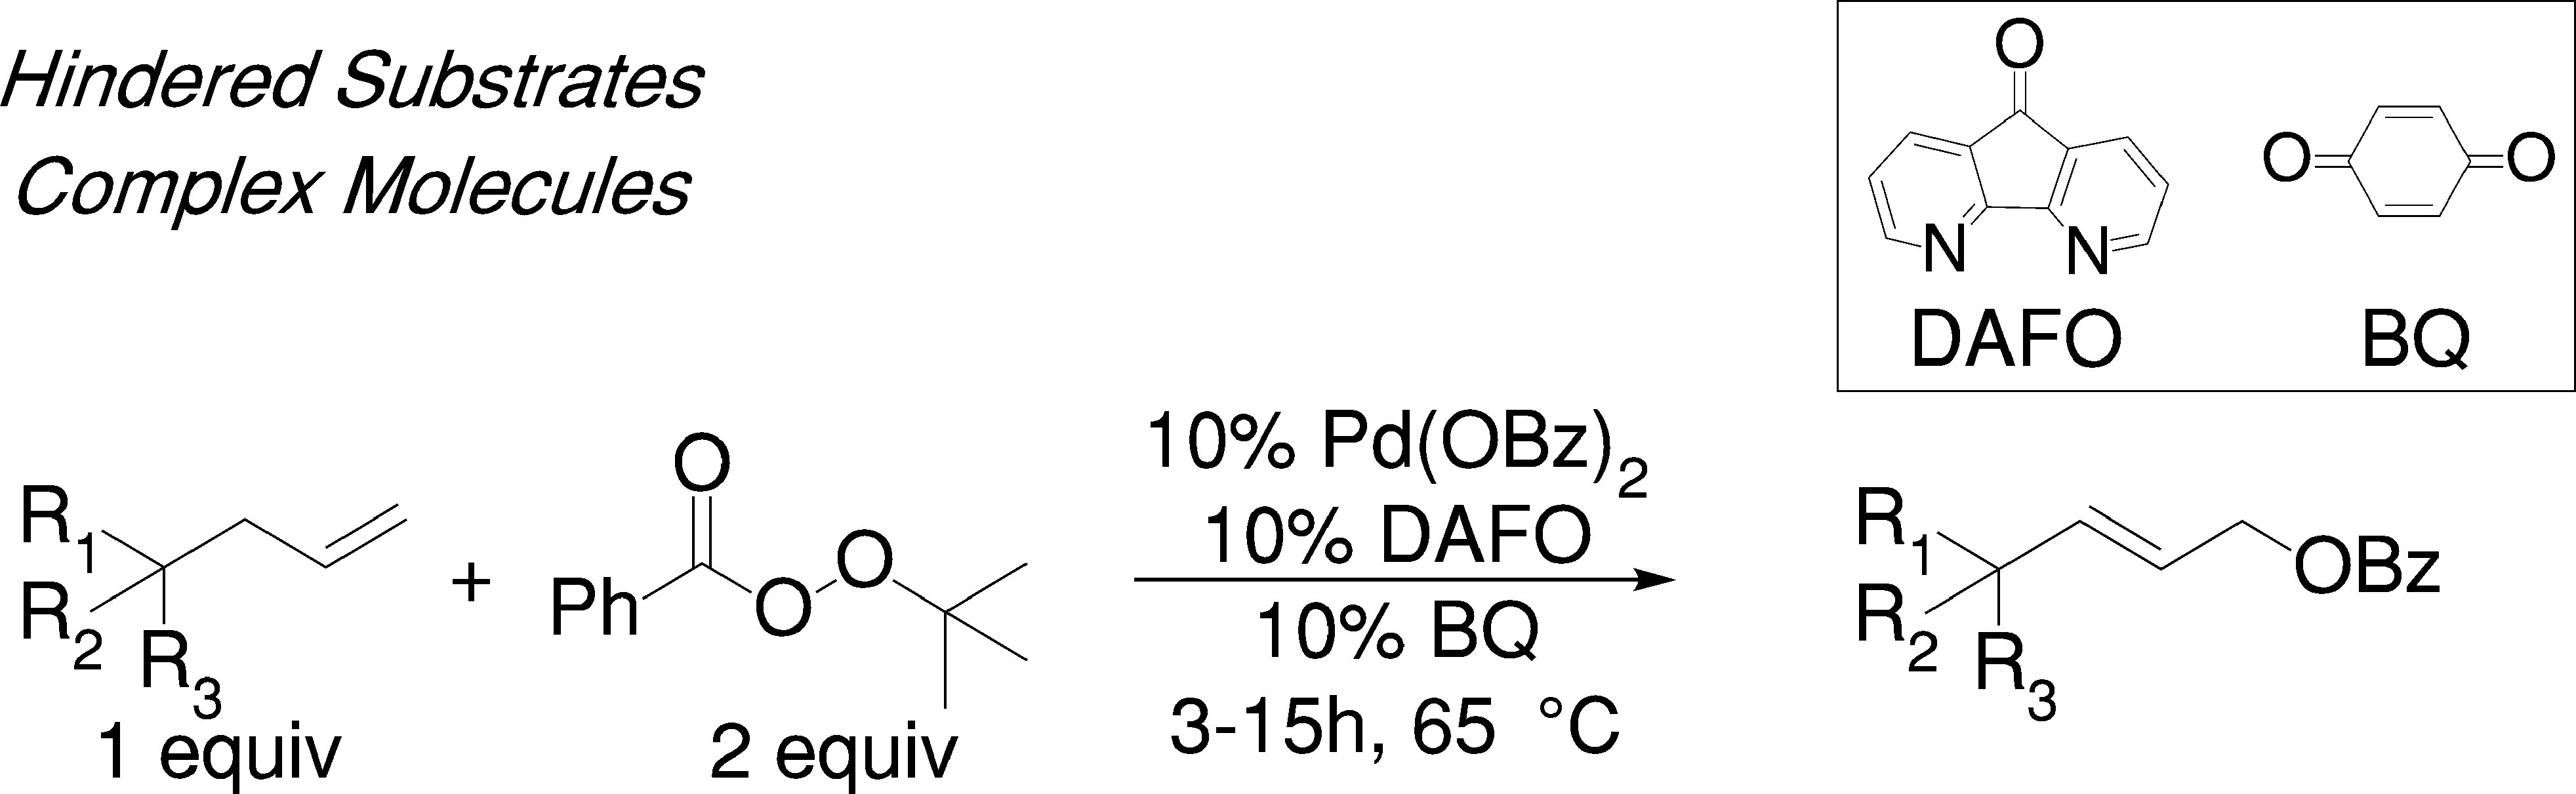 Oxidation of Hindered Allylic C-h Bonds with Applications to the Functionalization of Complex Molecules